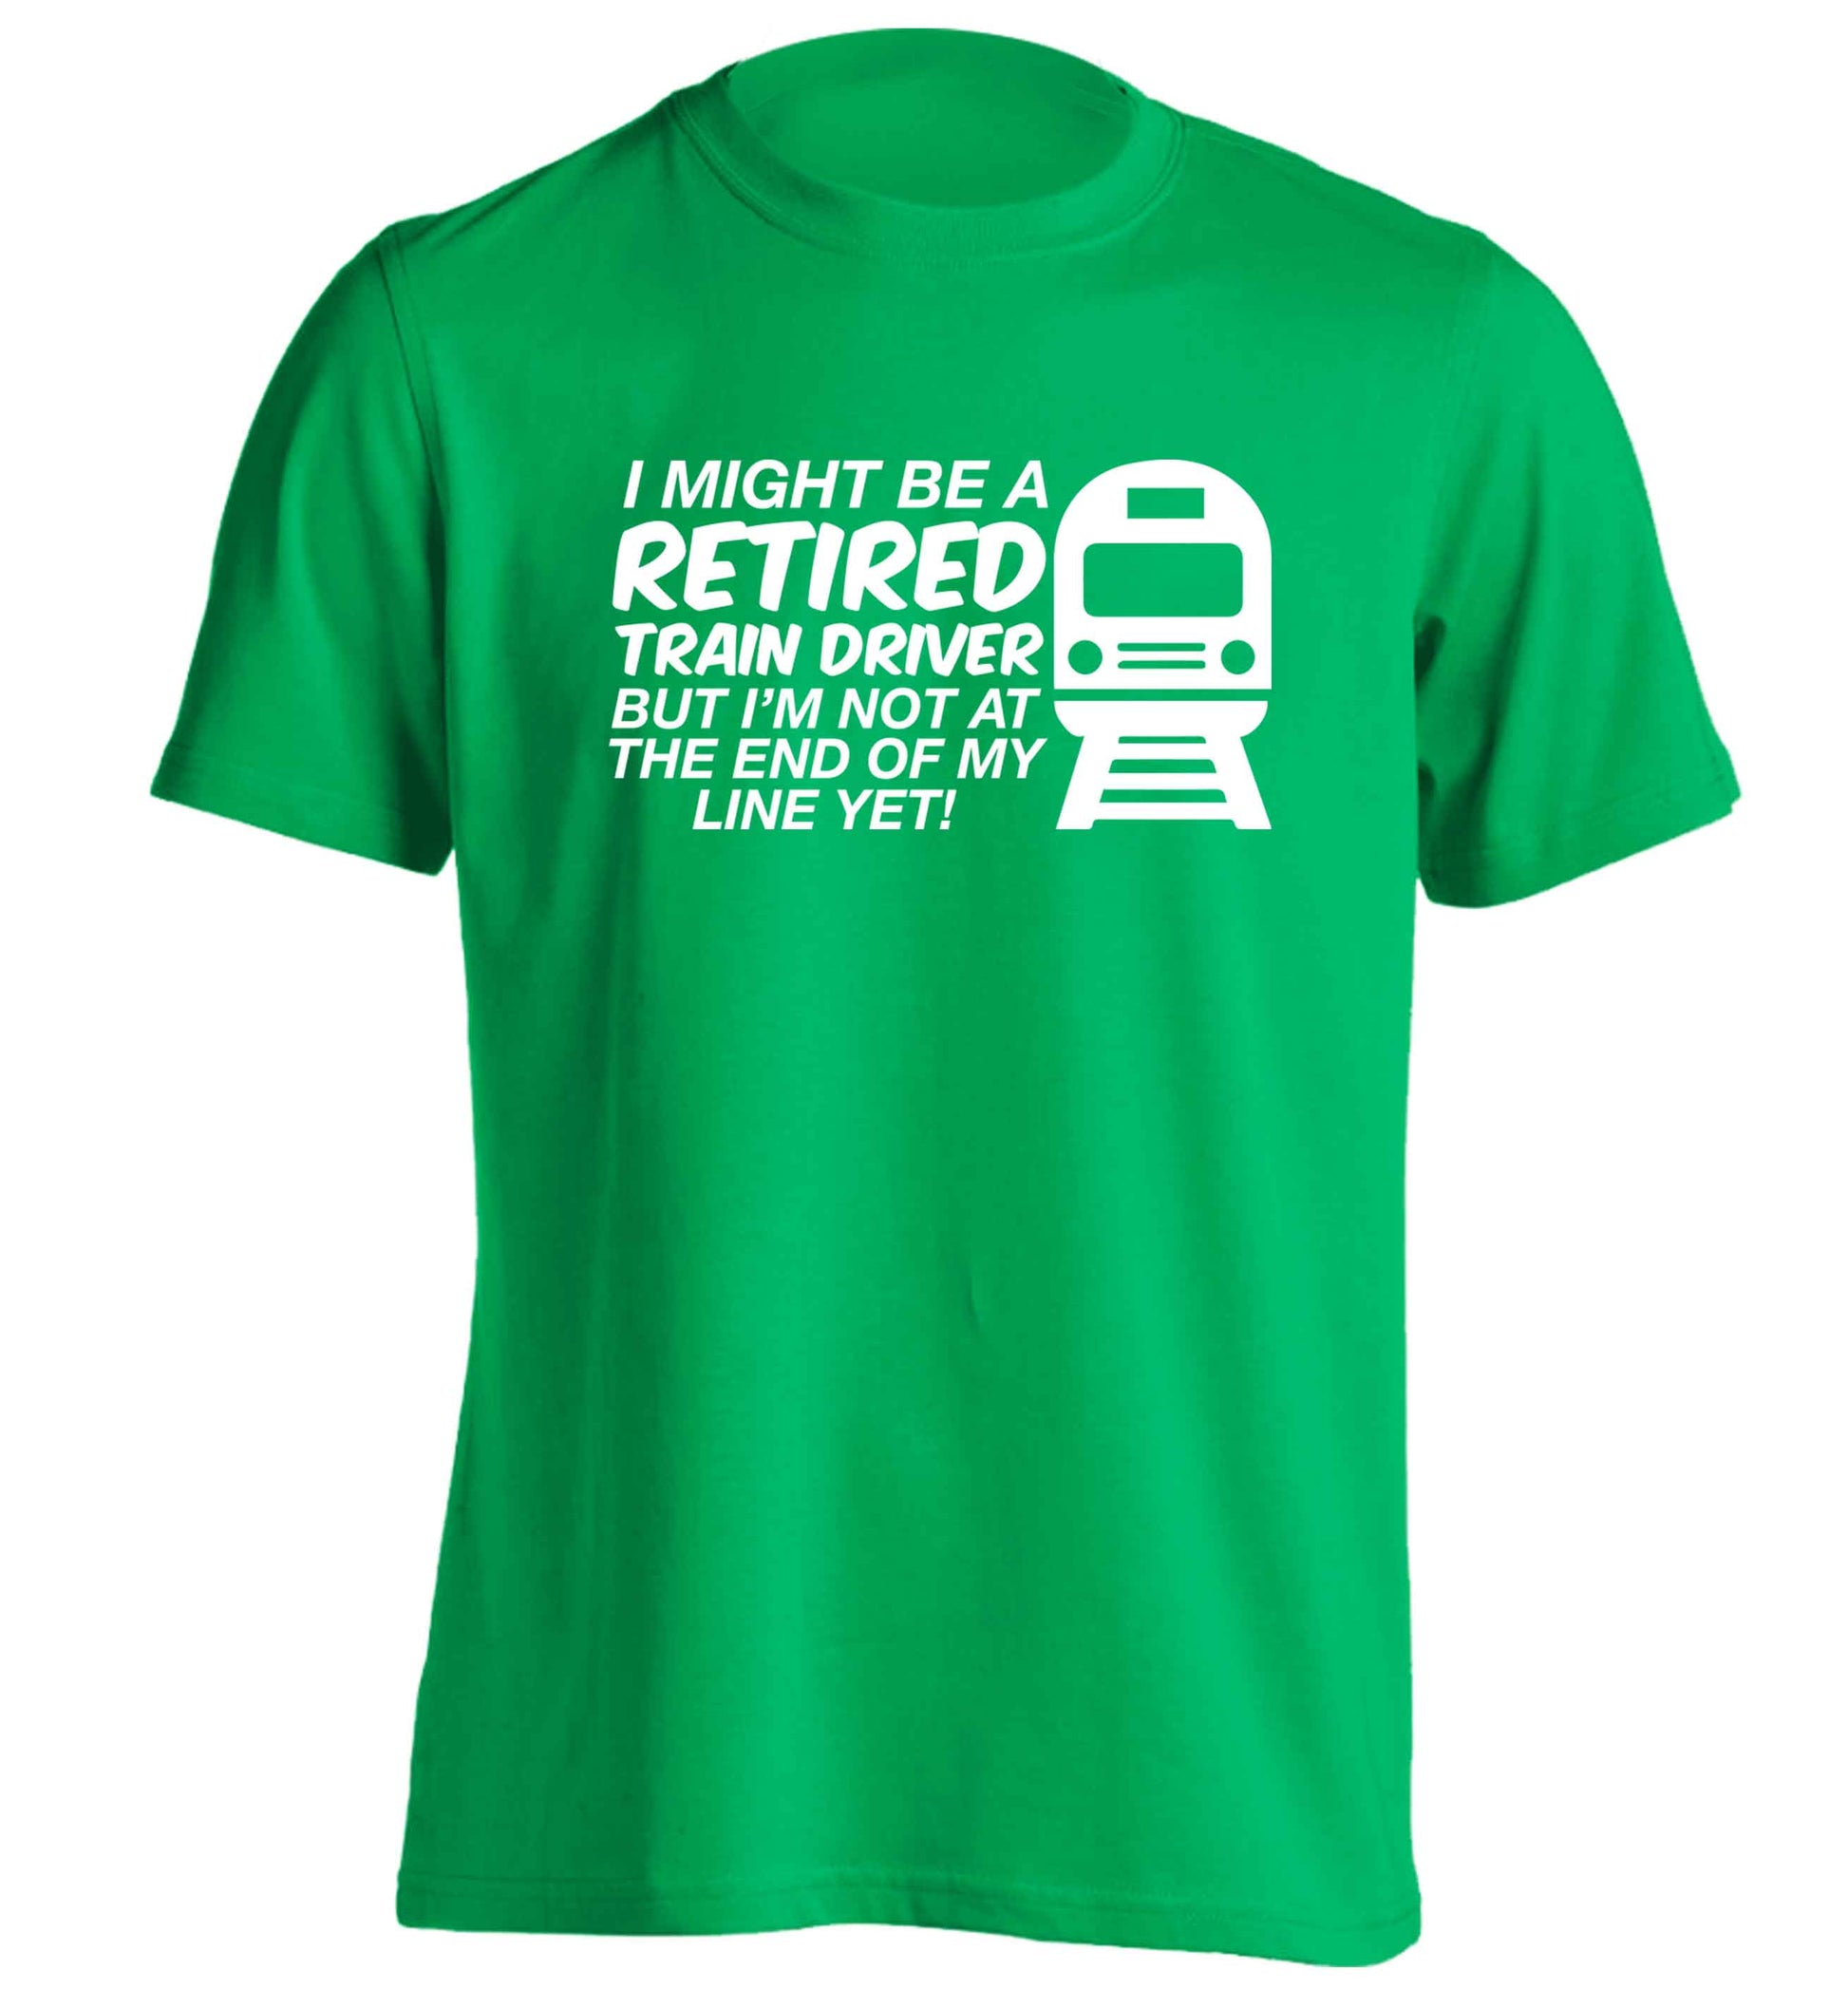 Retired train driver but I'm not at the end of my line yet adults unisex green Tshirt 2XL